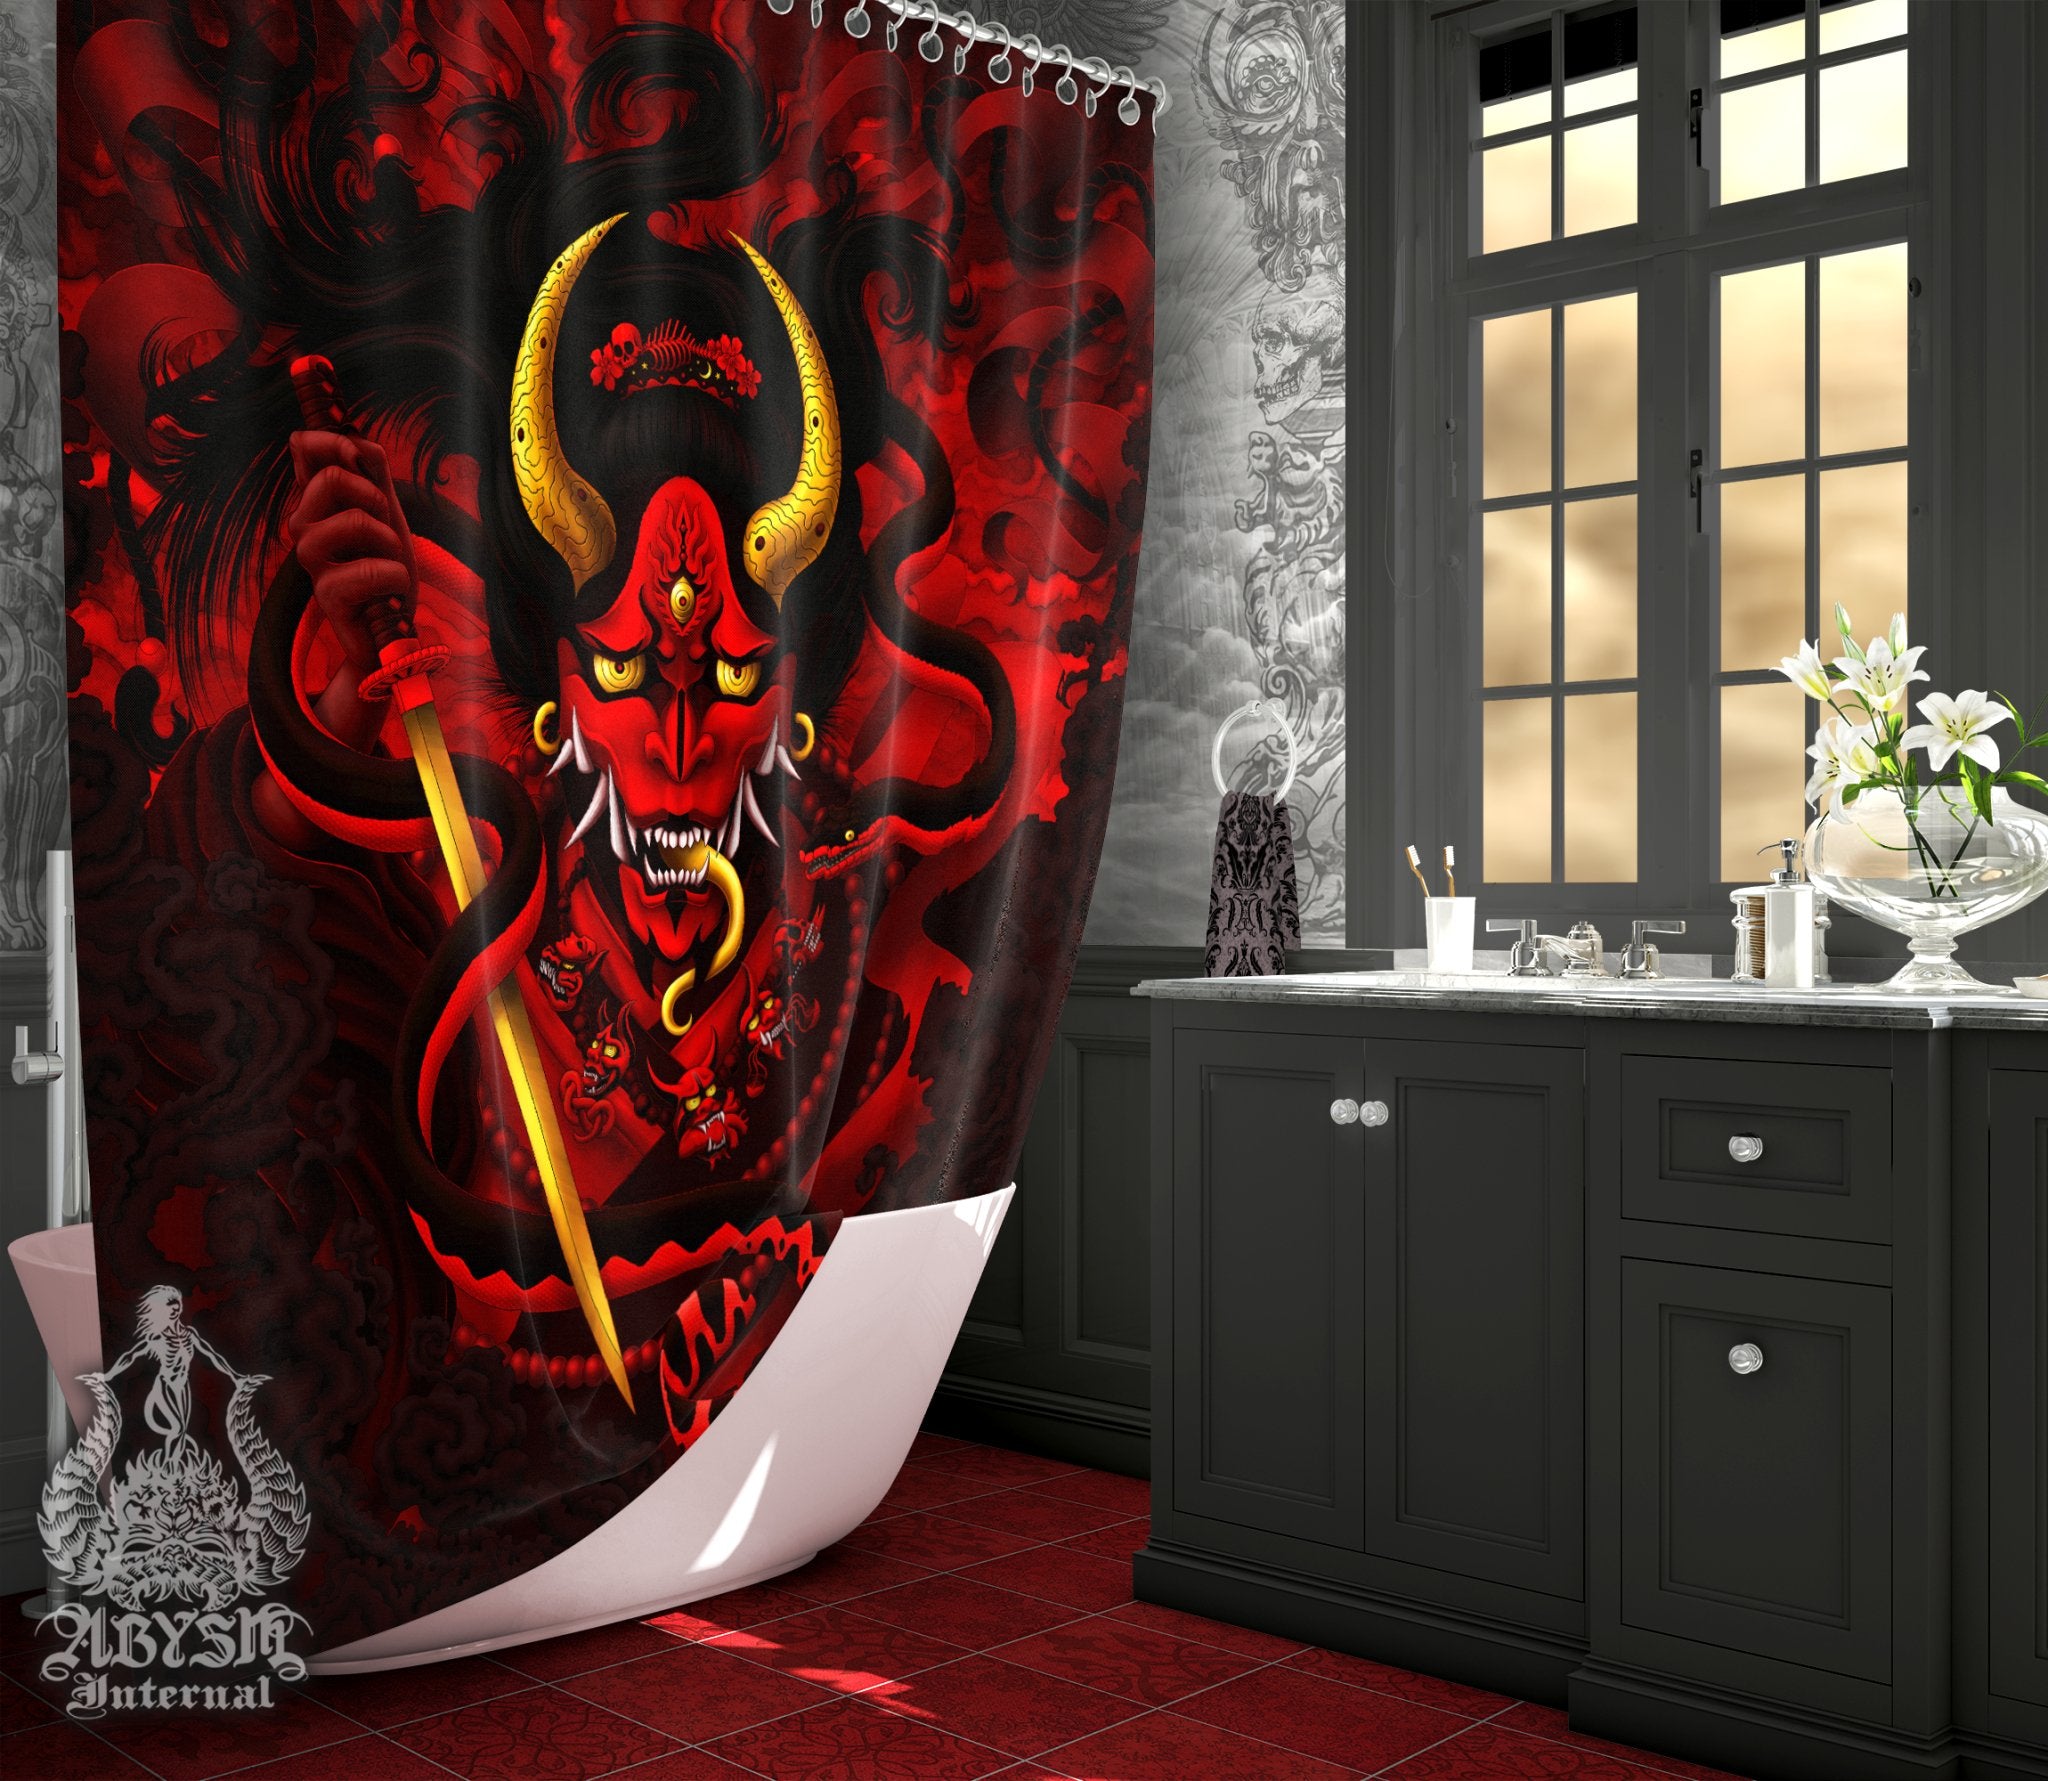 Bloody Gothic Demon Shower Curtain, 71x74 inches, Japanese Youkai Anime and Gamer Bathroom Decor - Hannya and Snake, Red - Abysm Internal